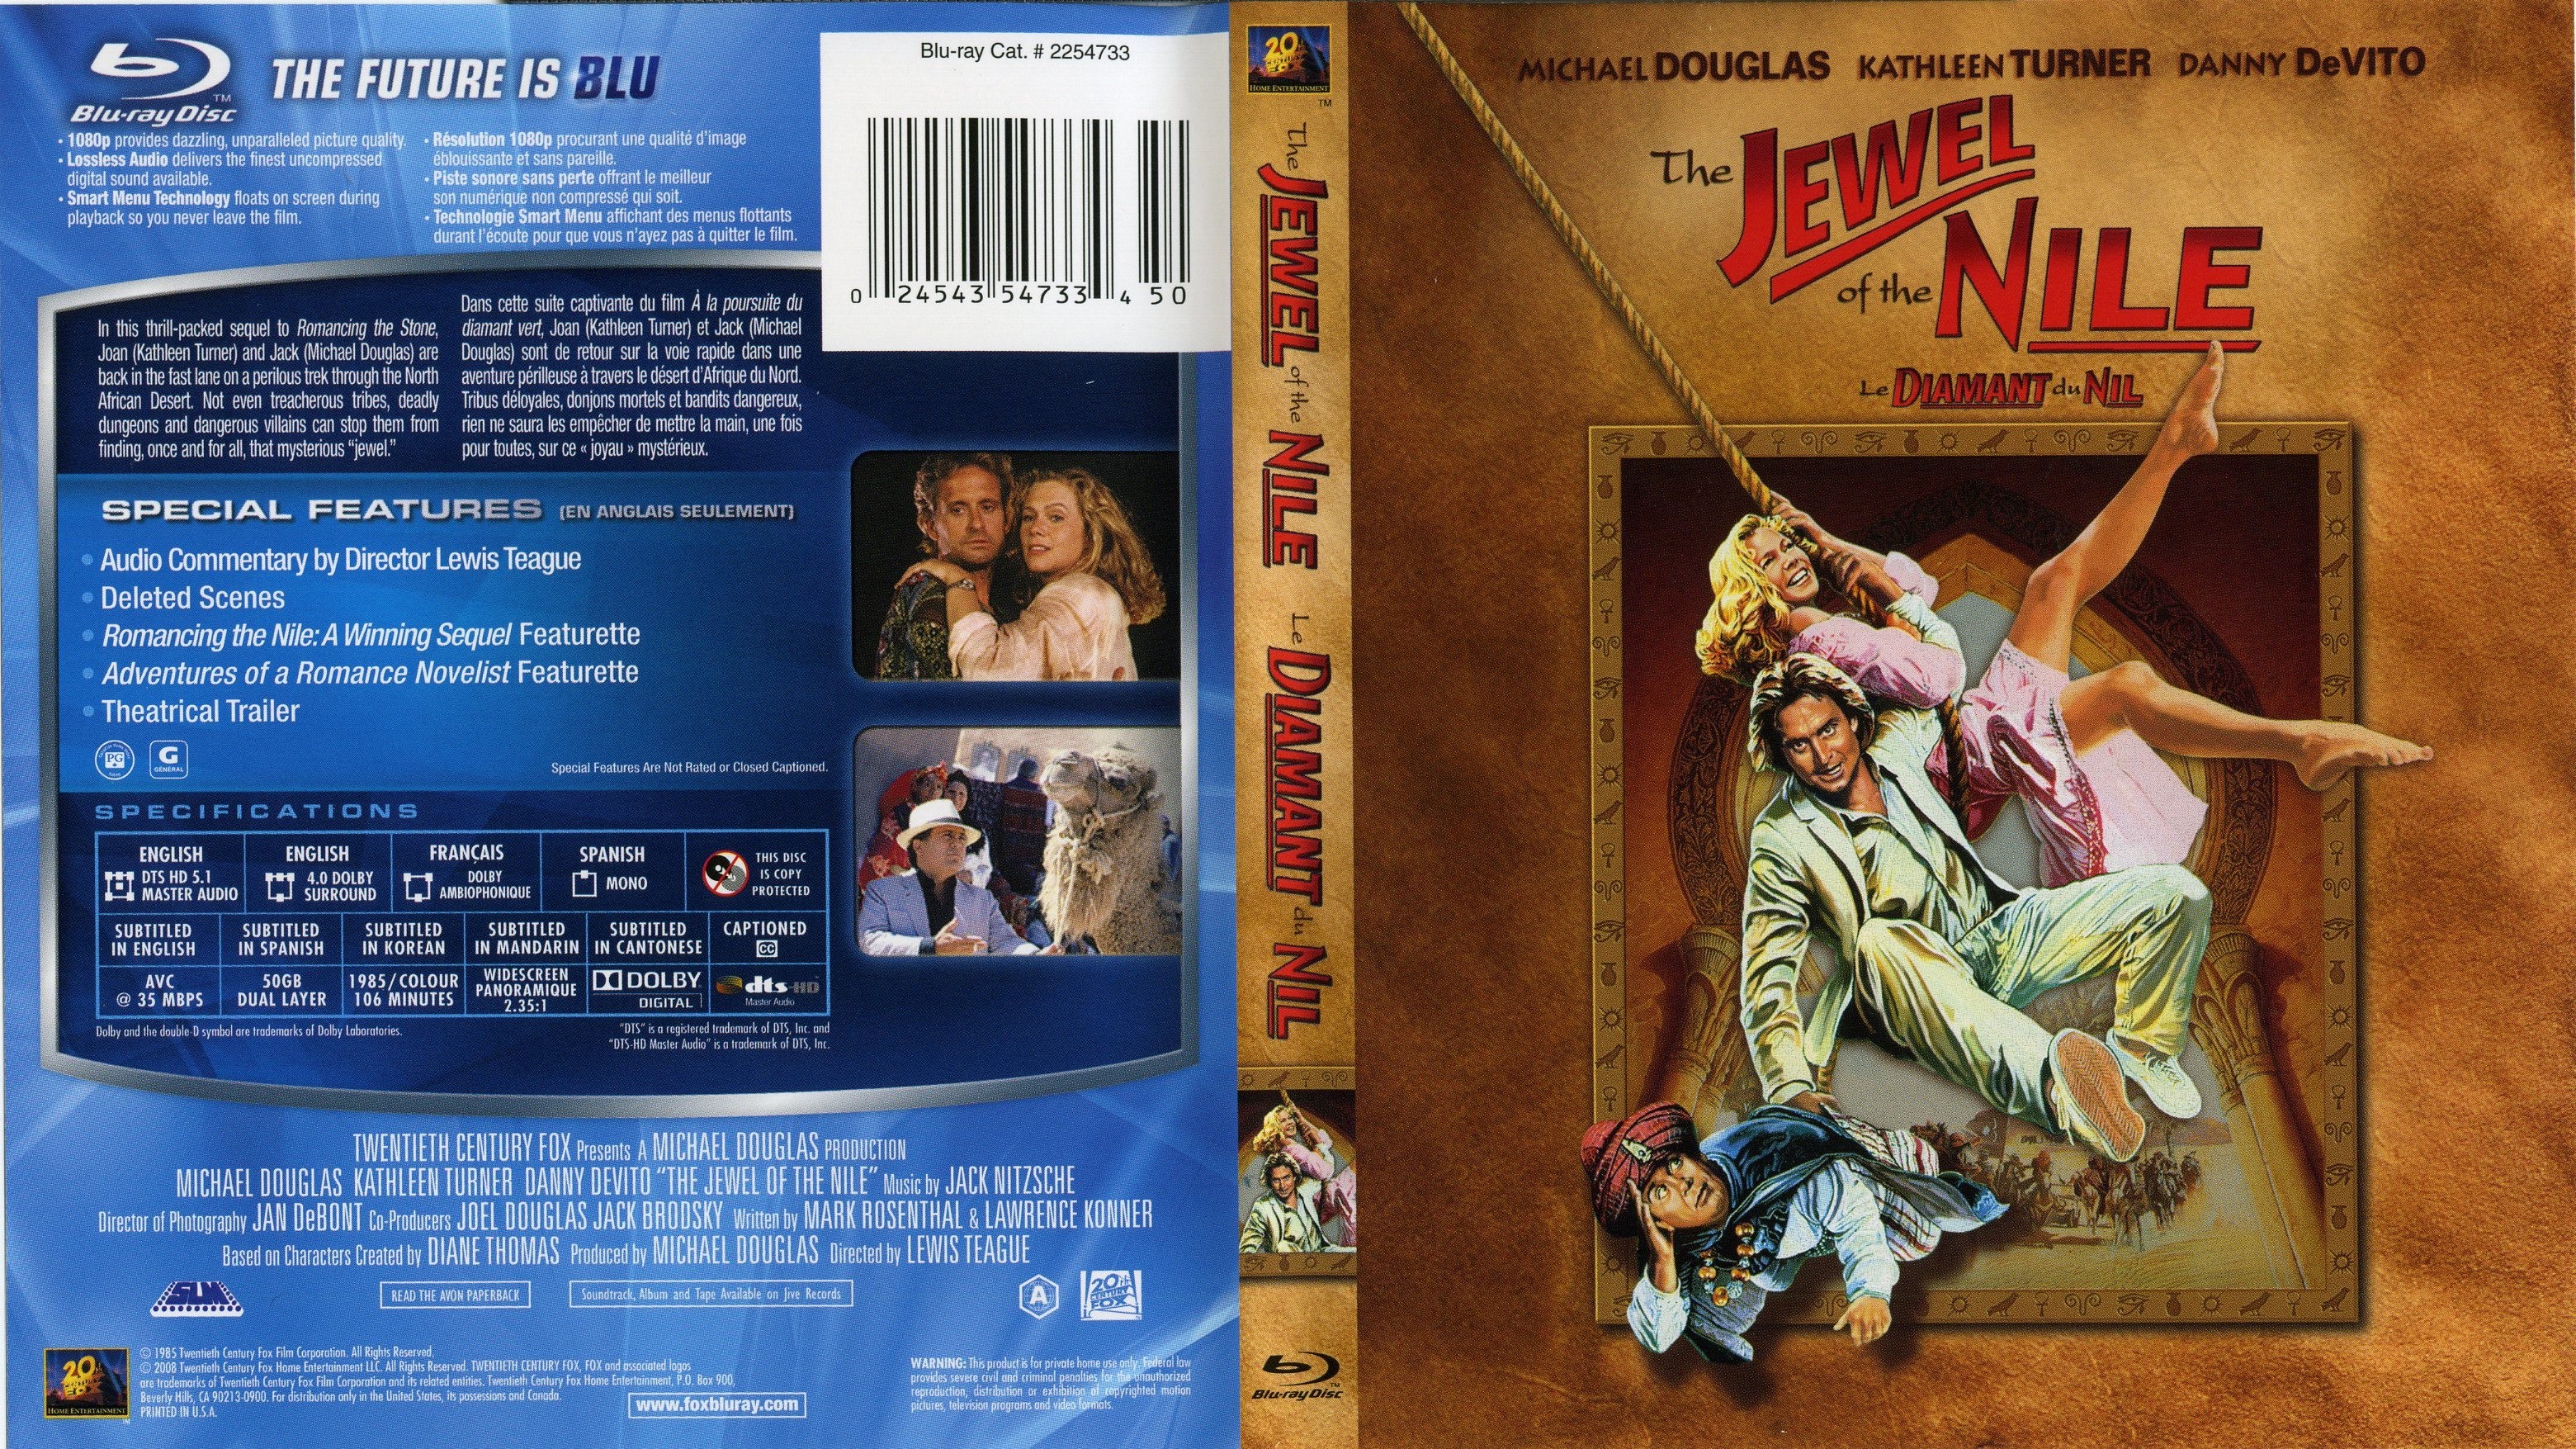 Jaquette DVD The Jewel Of The Nile - Le diamant du nil (Canadienne) (BLU-RAY)